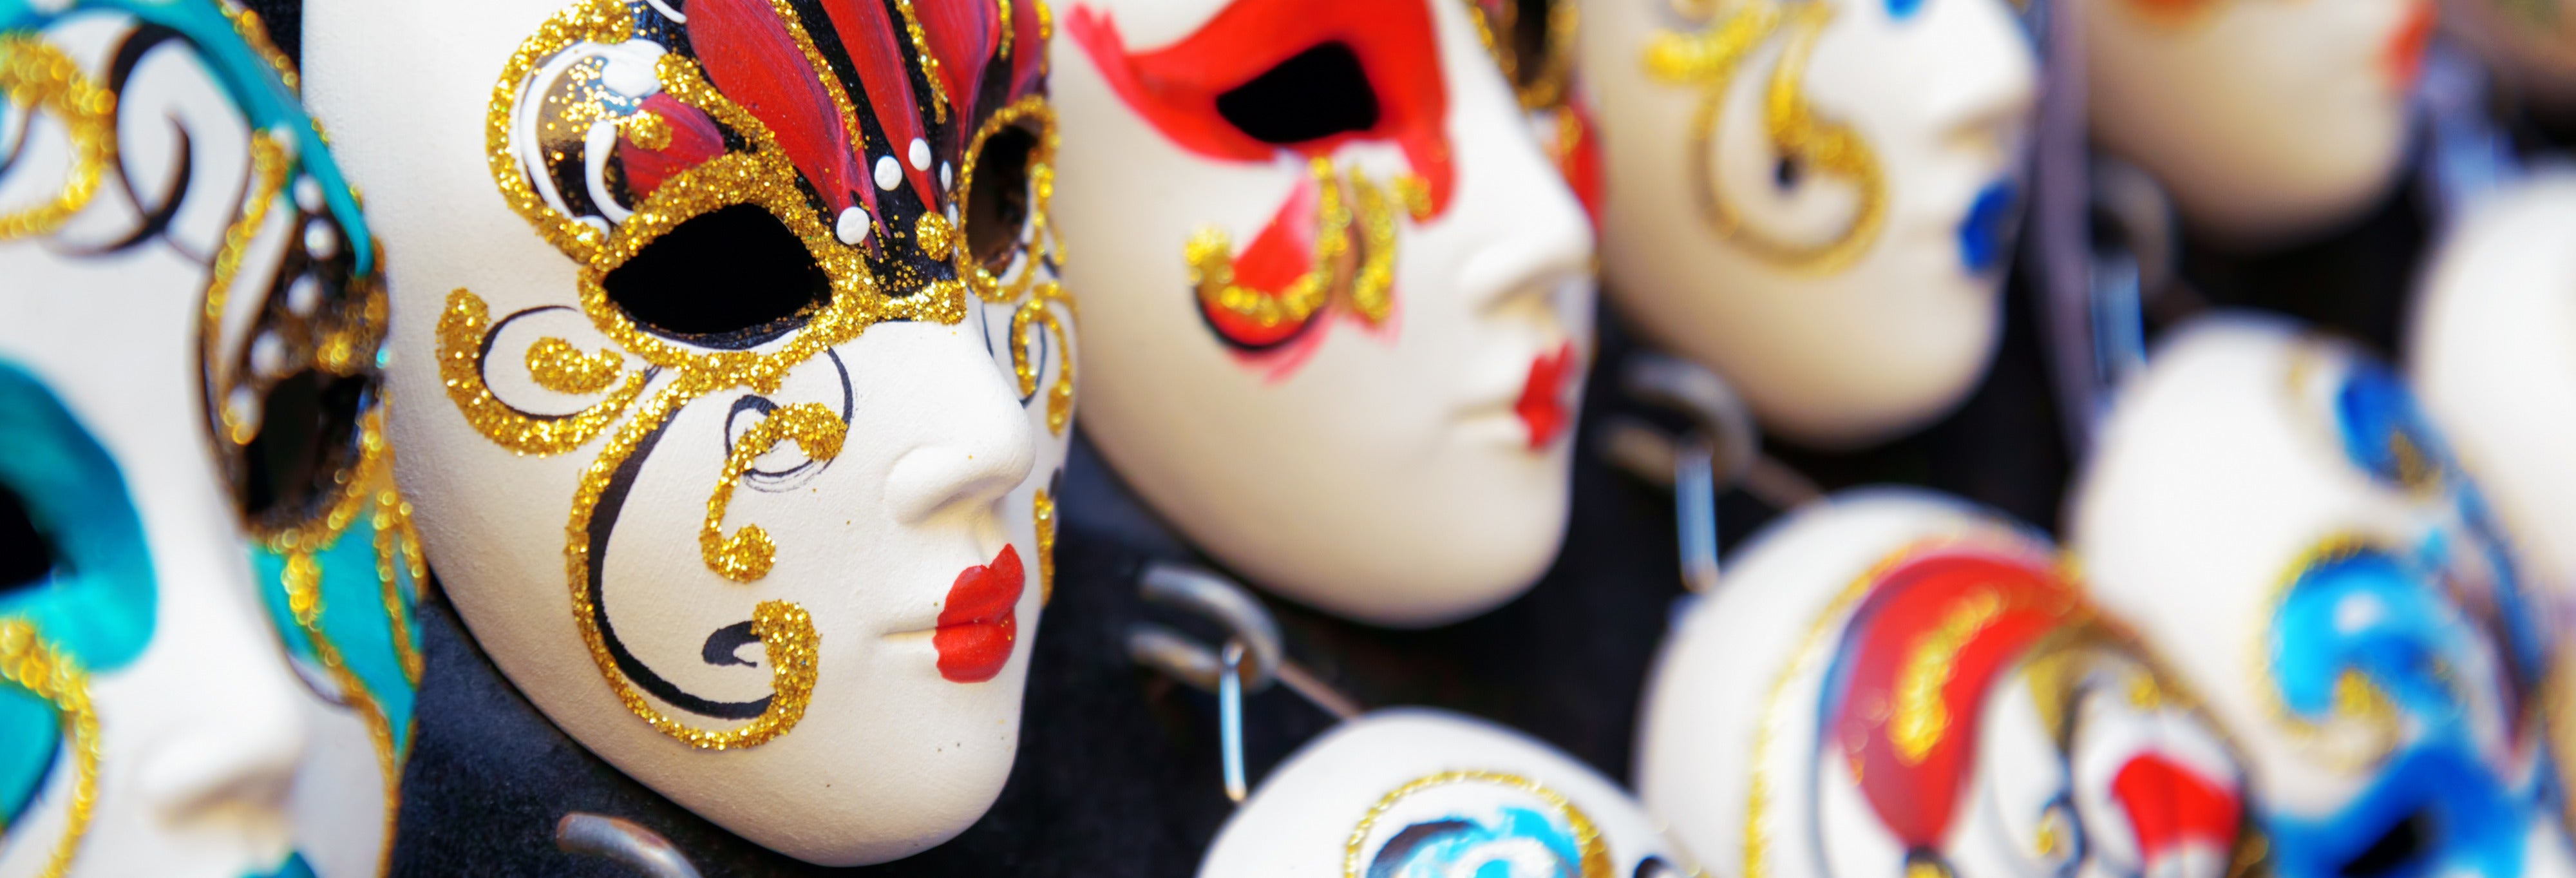 Venice Carnival Mask: Make Your Own